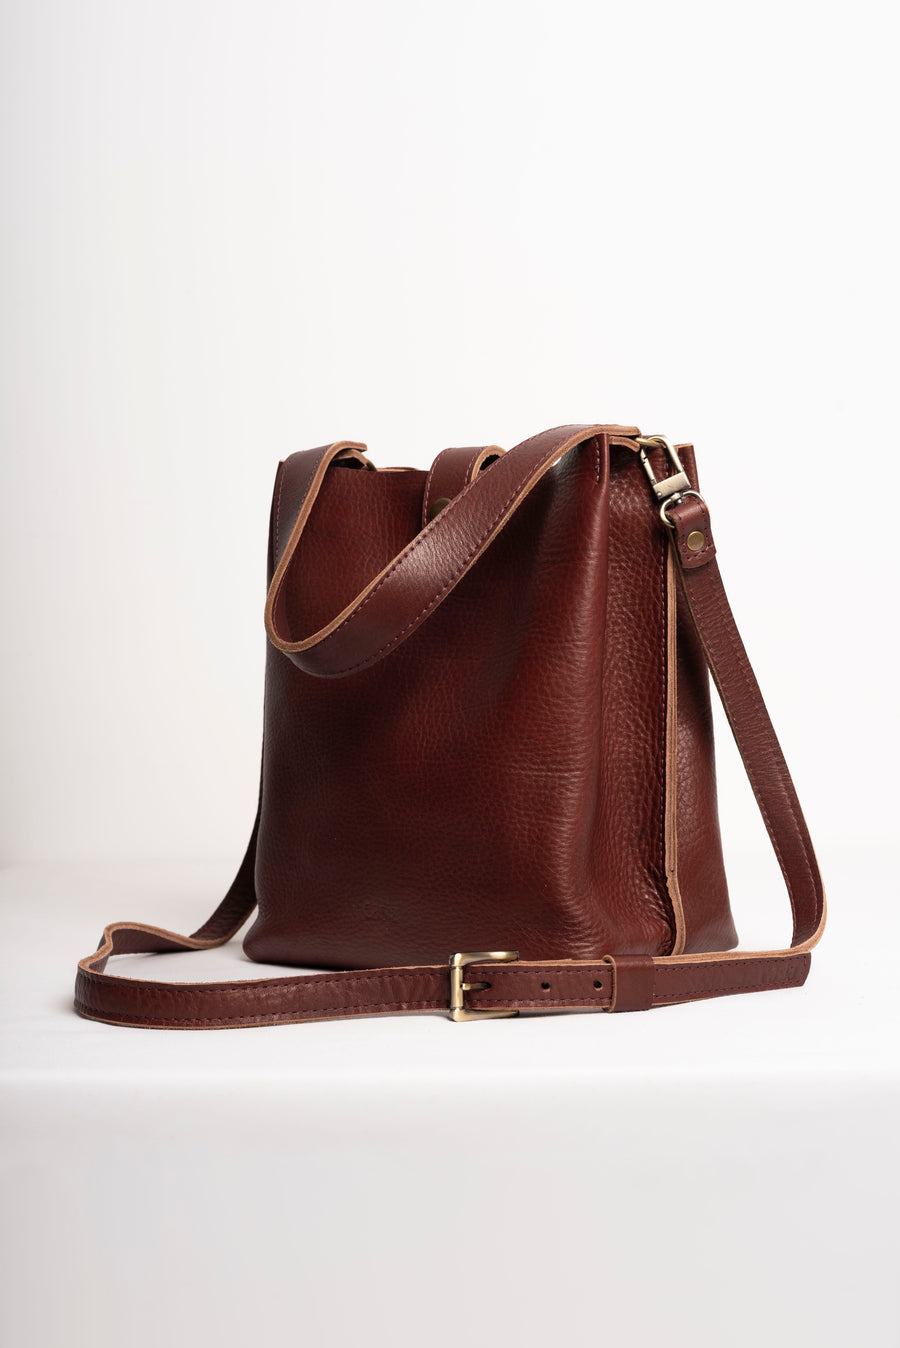 Full grain leather mini tote bag. Vegetable tanned leather shoulder bag. Brown crossbody bag. Leather purse.